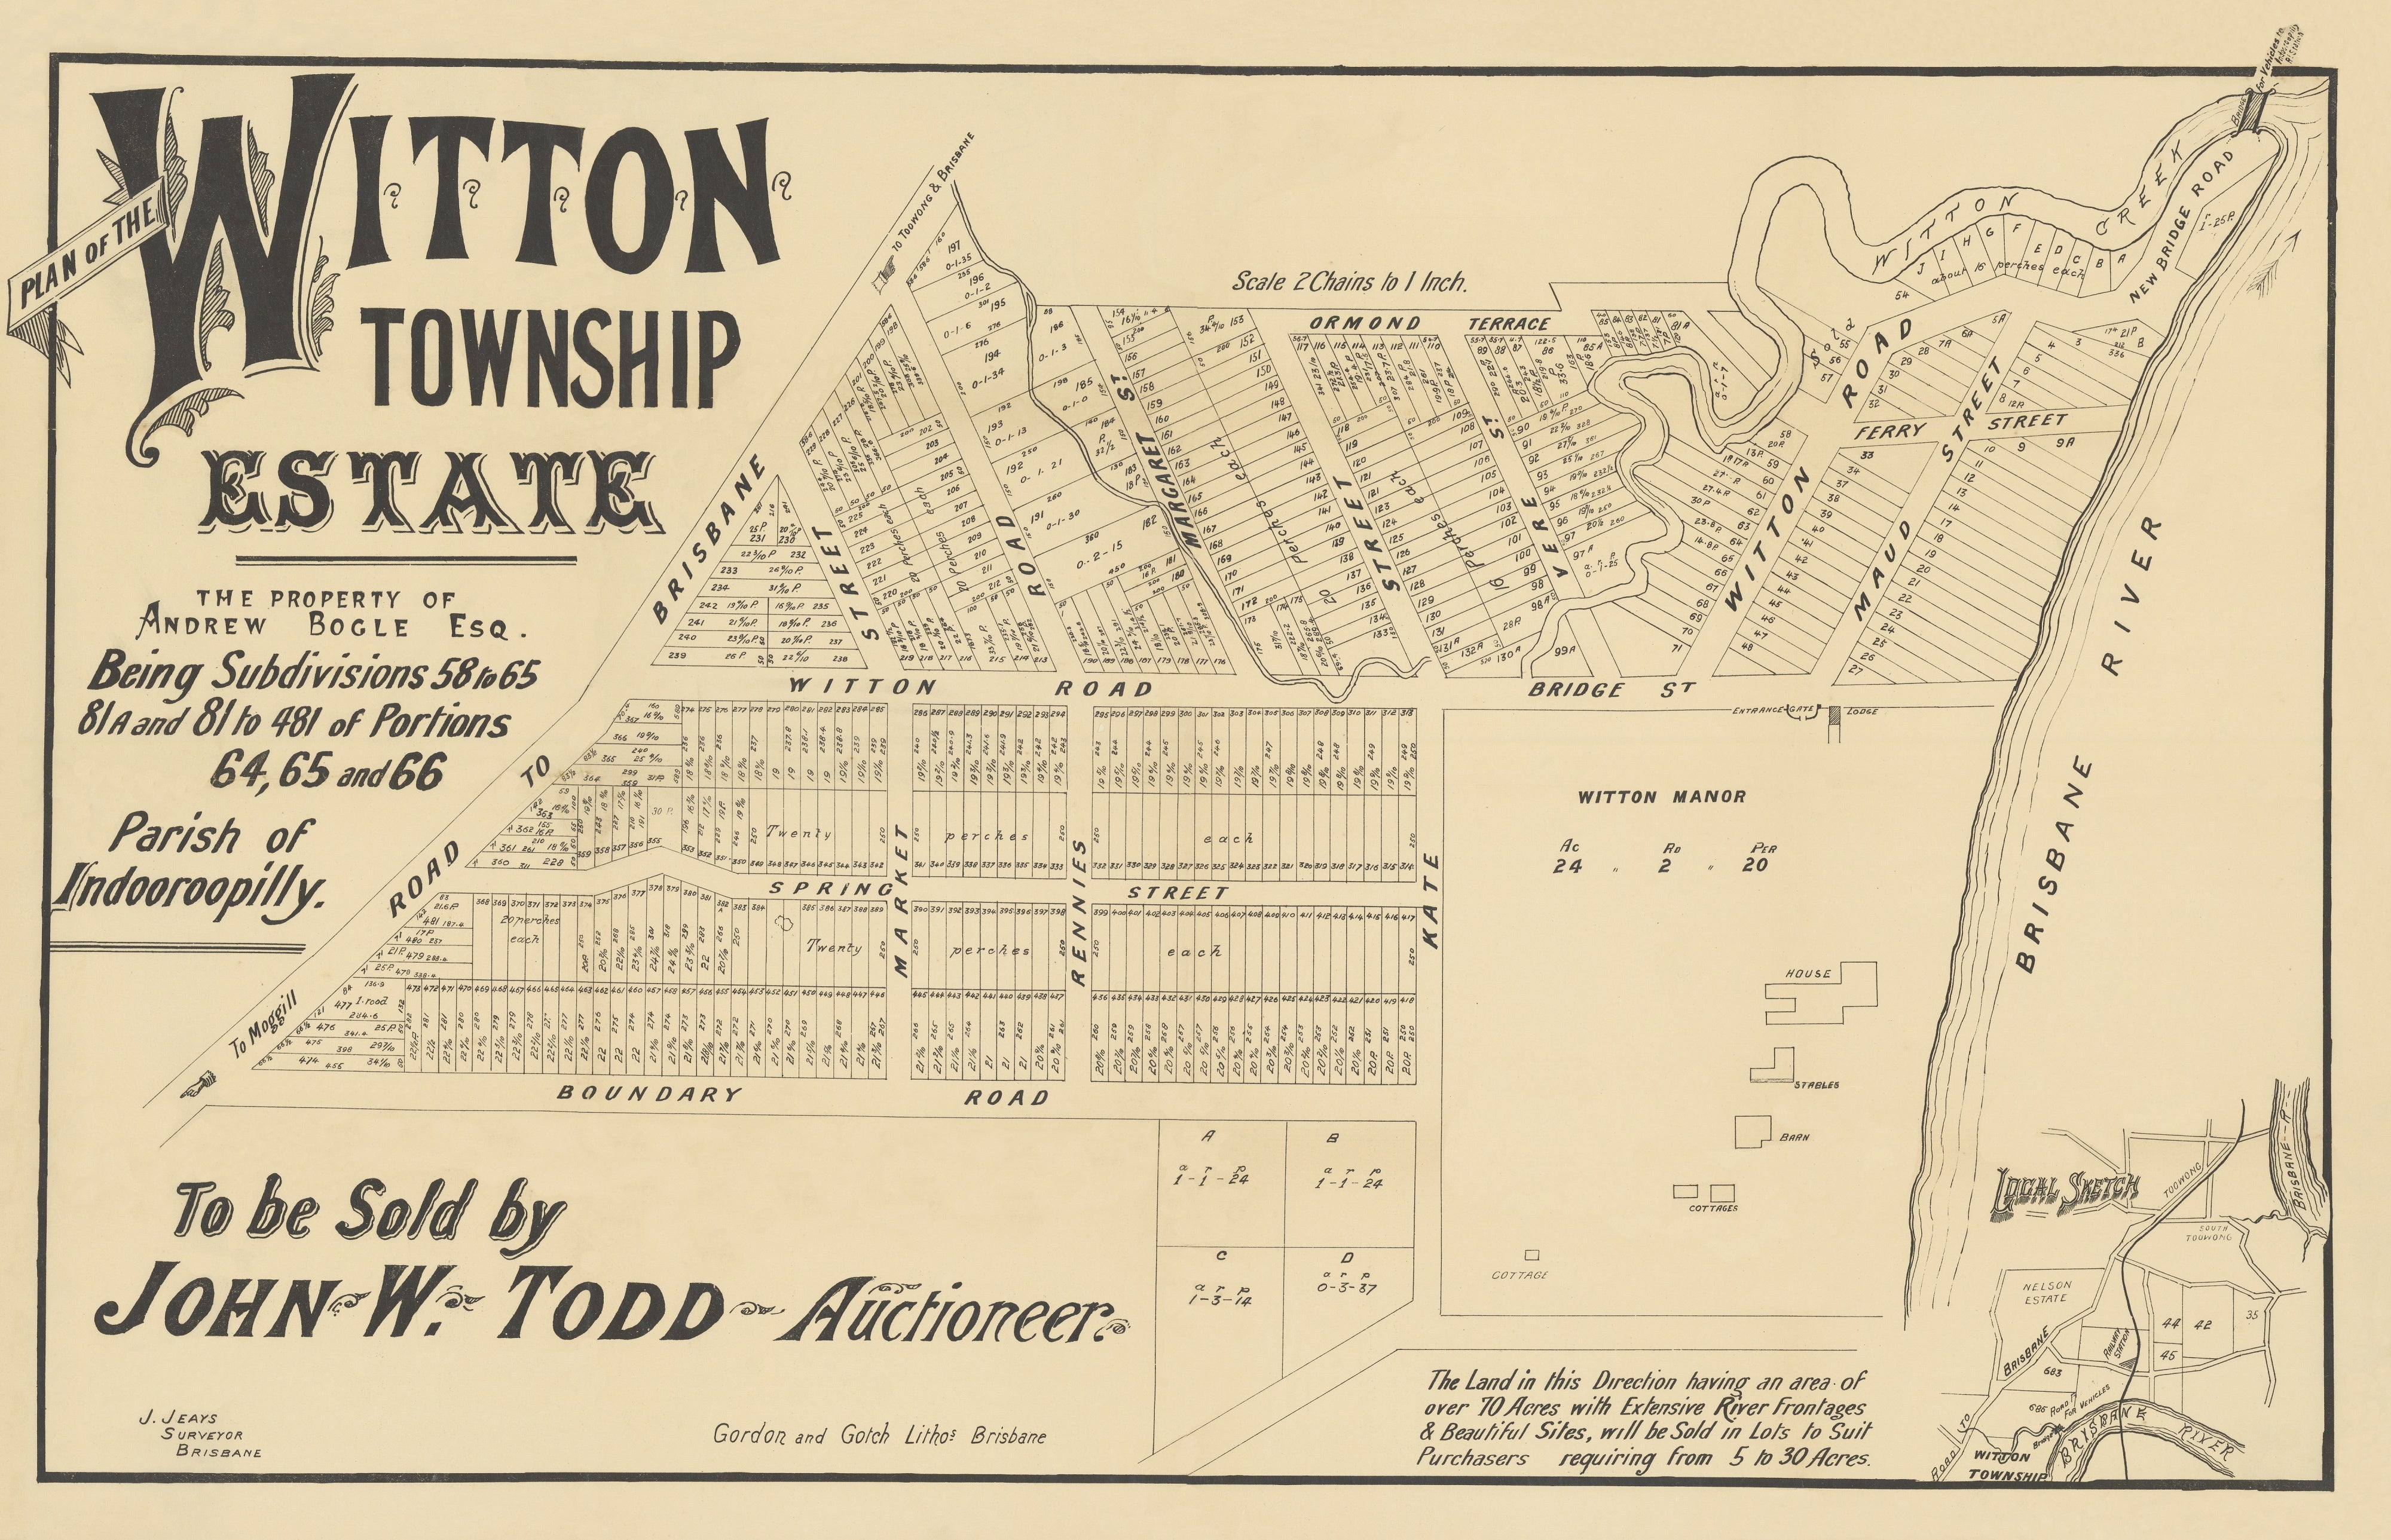 1886 Indooroopilly - Witton Township Estate